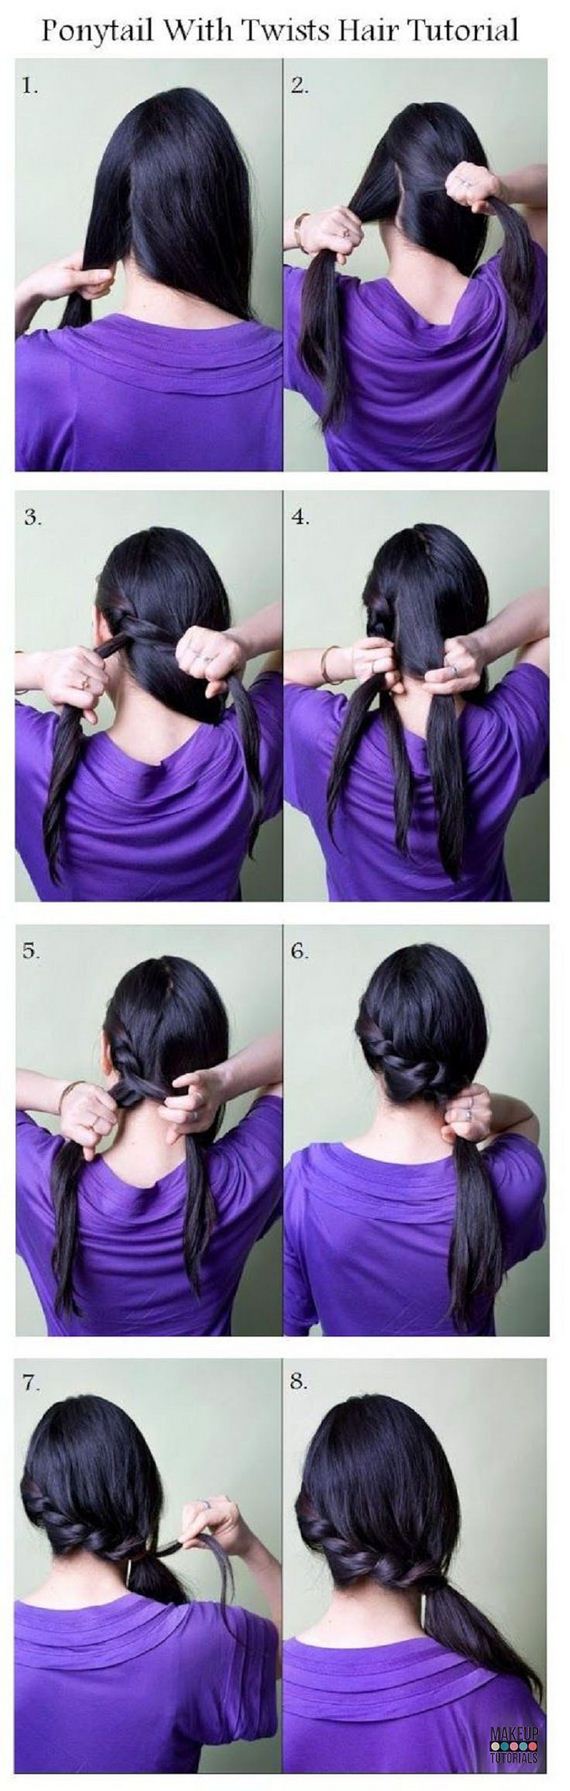 06-Easy-Hairstyles